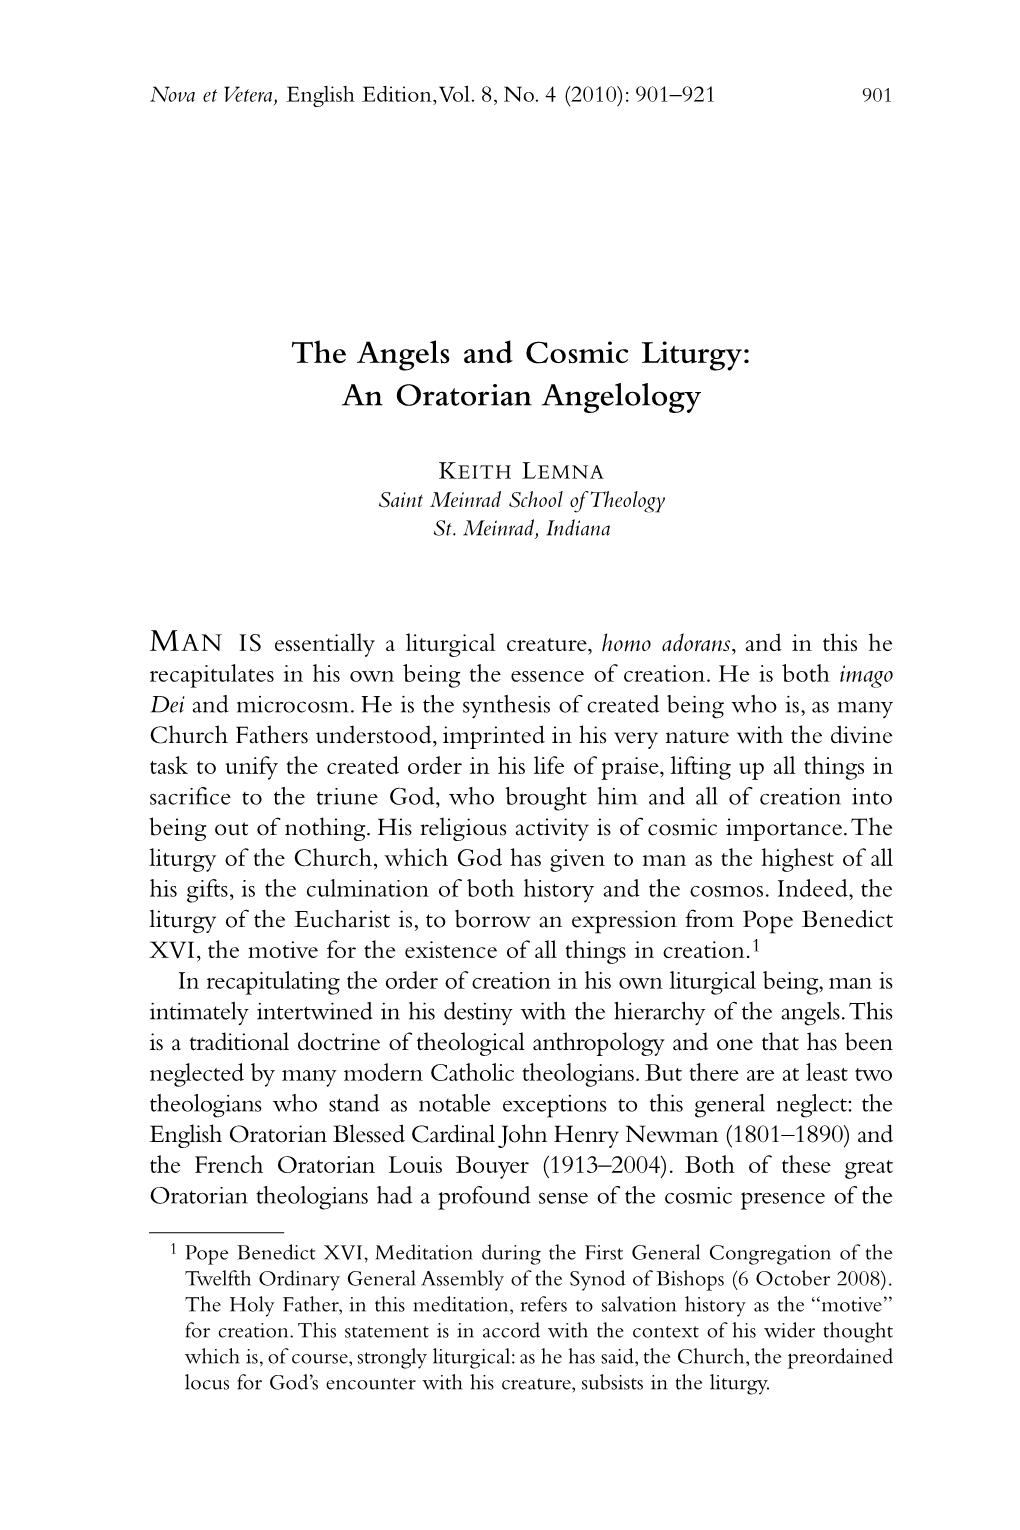 The Angels and Cosmic Liturgy: an Oratorian Angelology